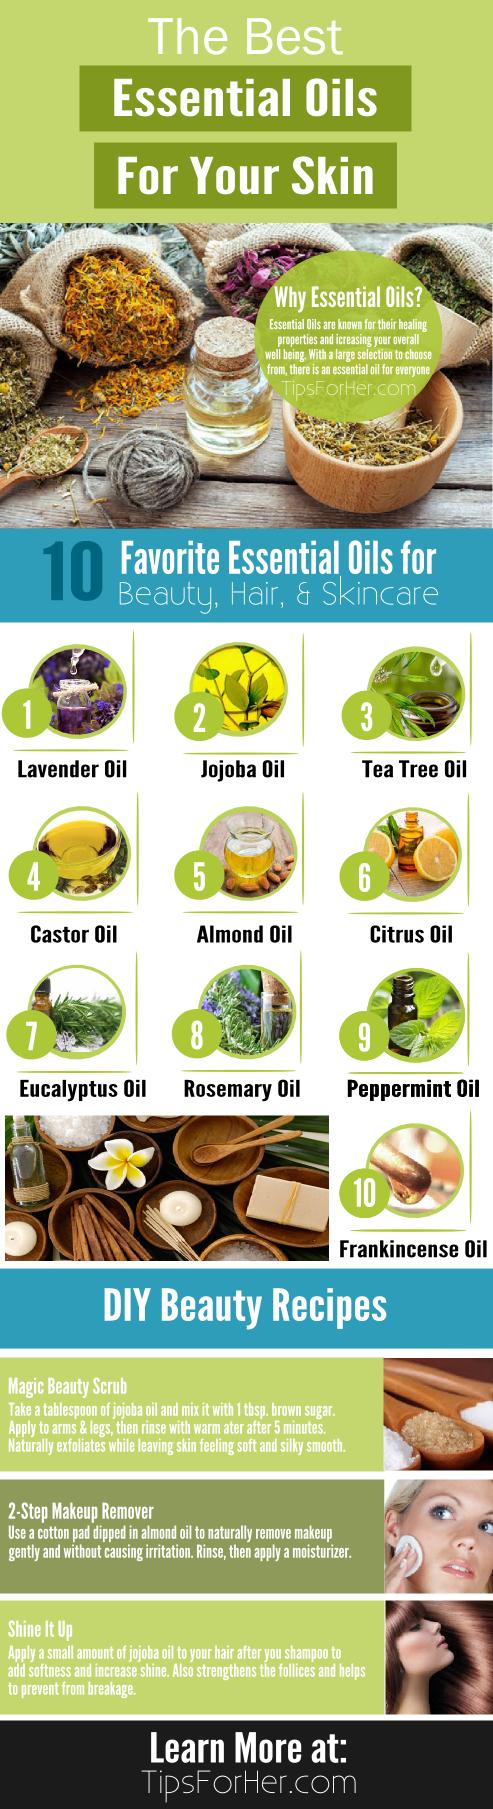 The Best Essential Oils For Your Skin!